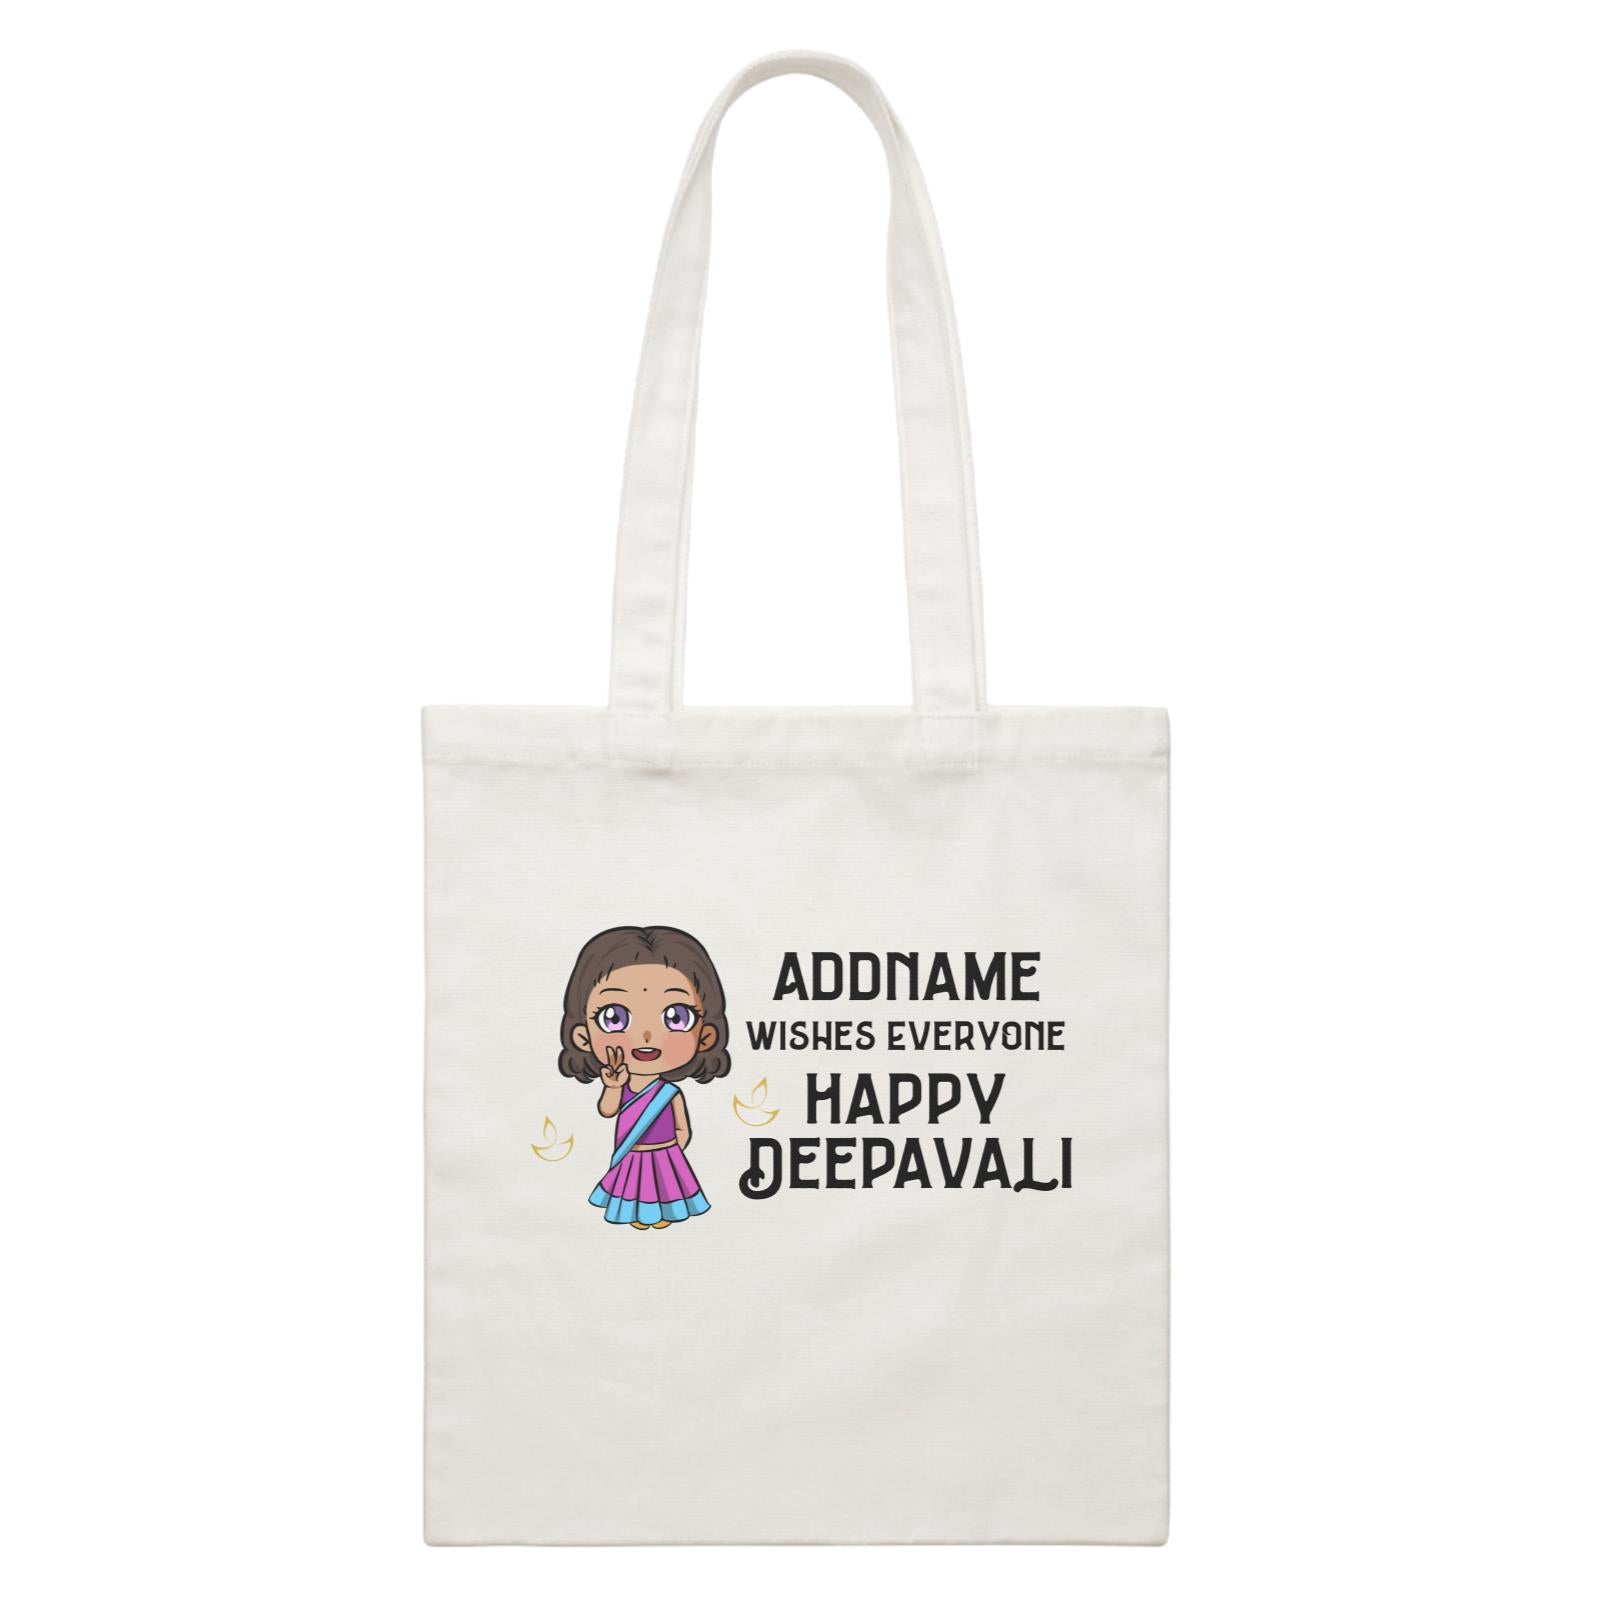 Deepavali Chibi Little Girl Front Addname Wishes Everyone Deepavali White Canvas Bag